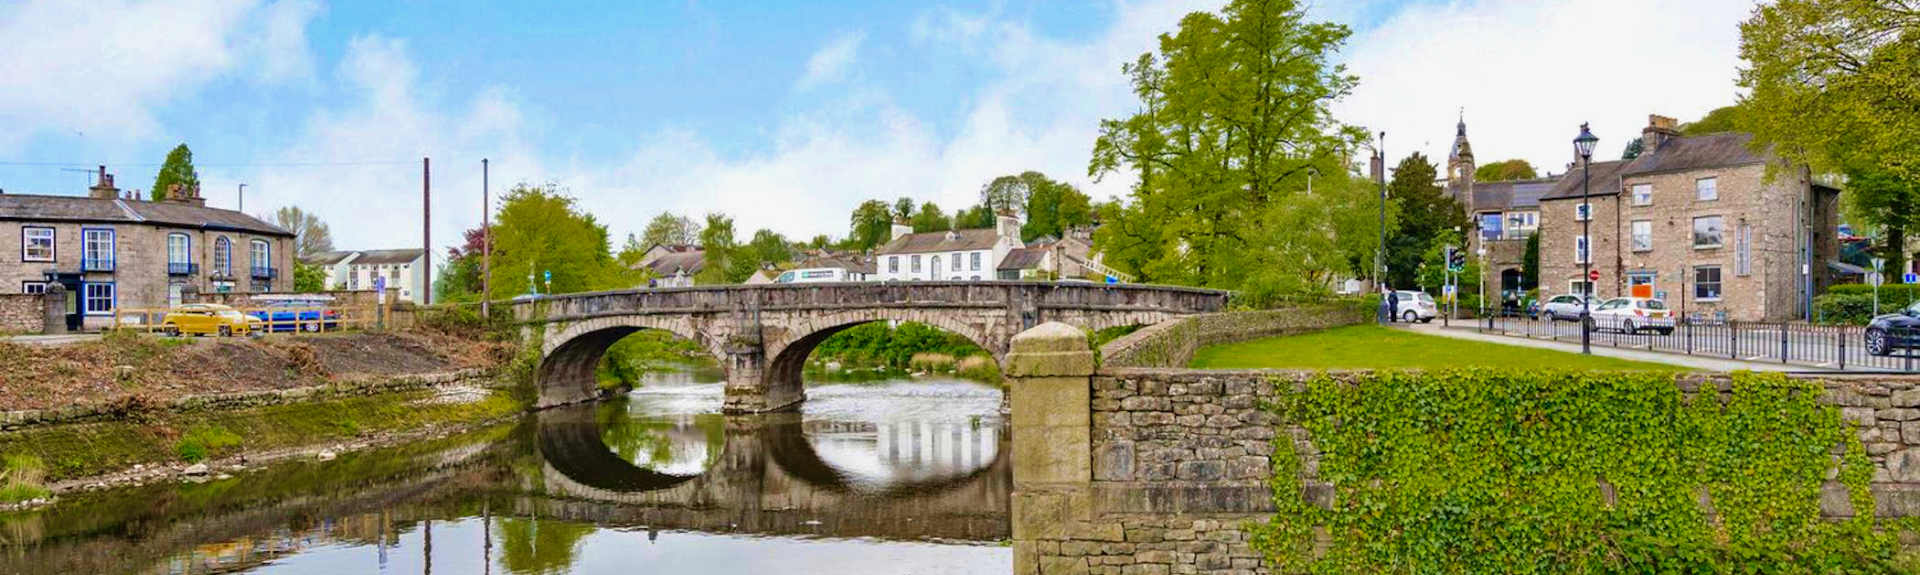 A twin-arched stone bridge is reflected in the still waters of the river below. Stone-bult houses line the riverside